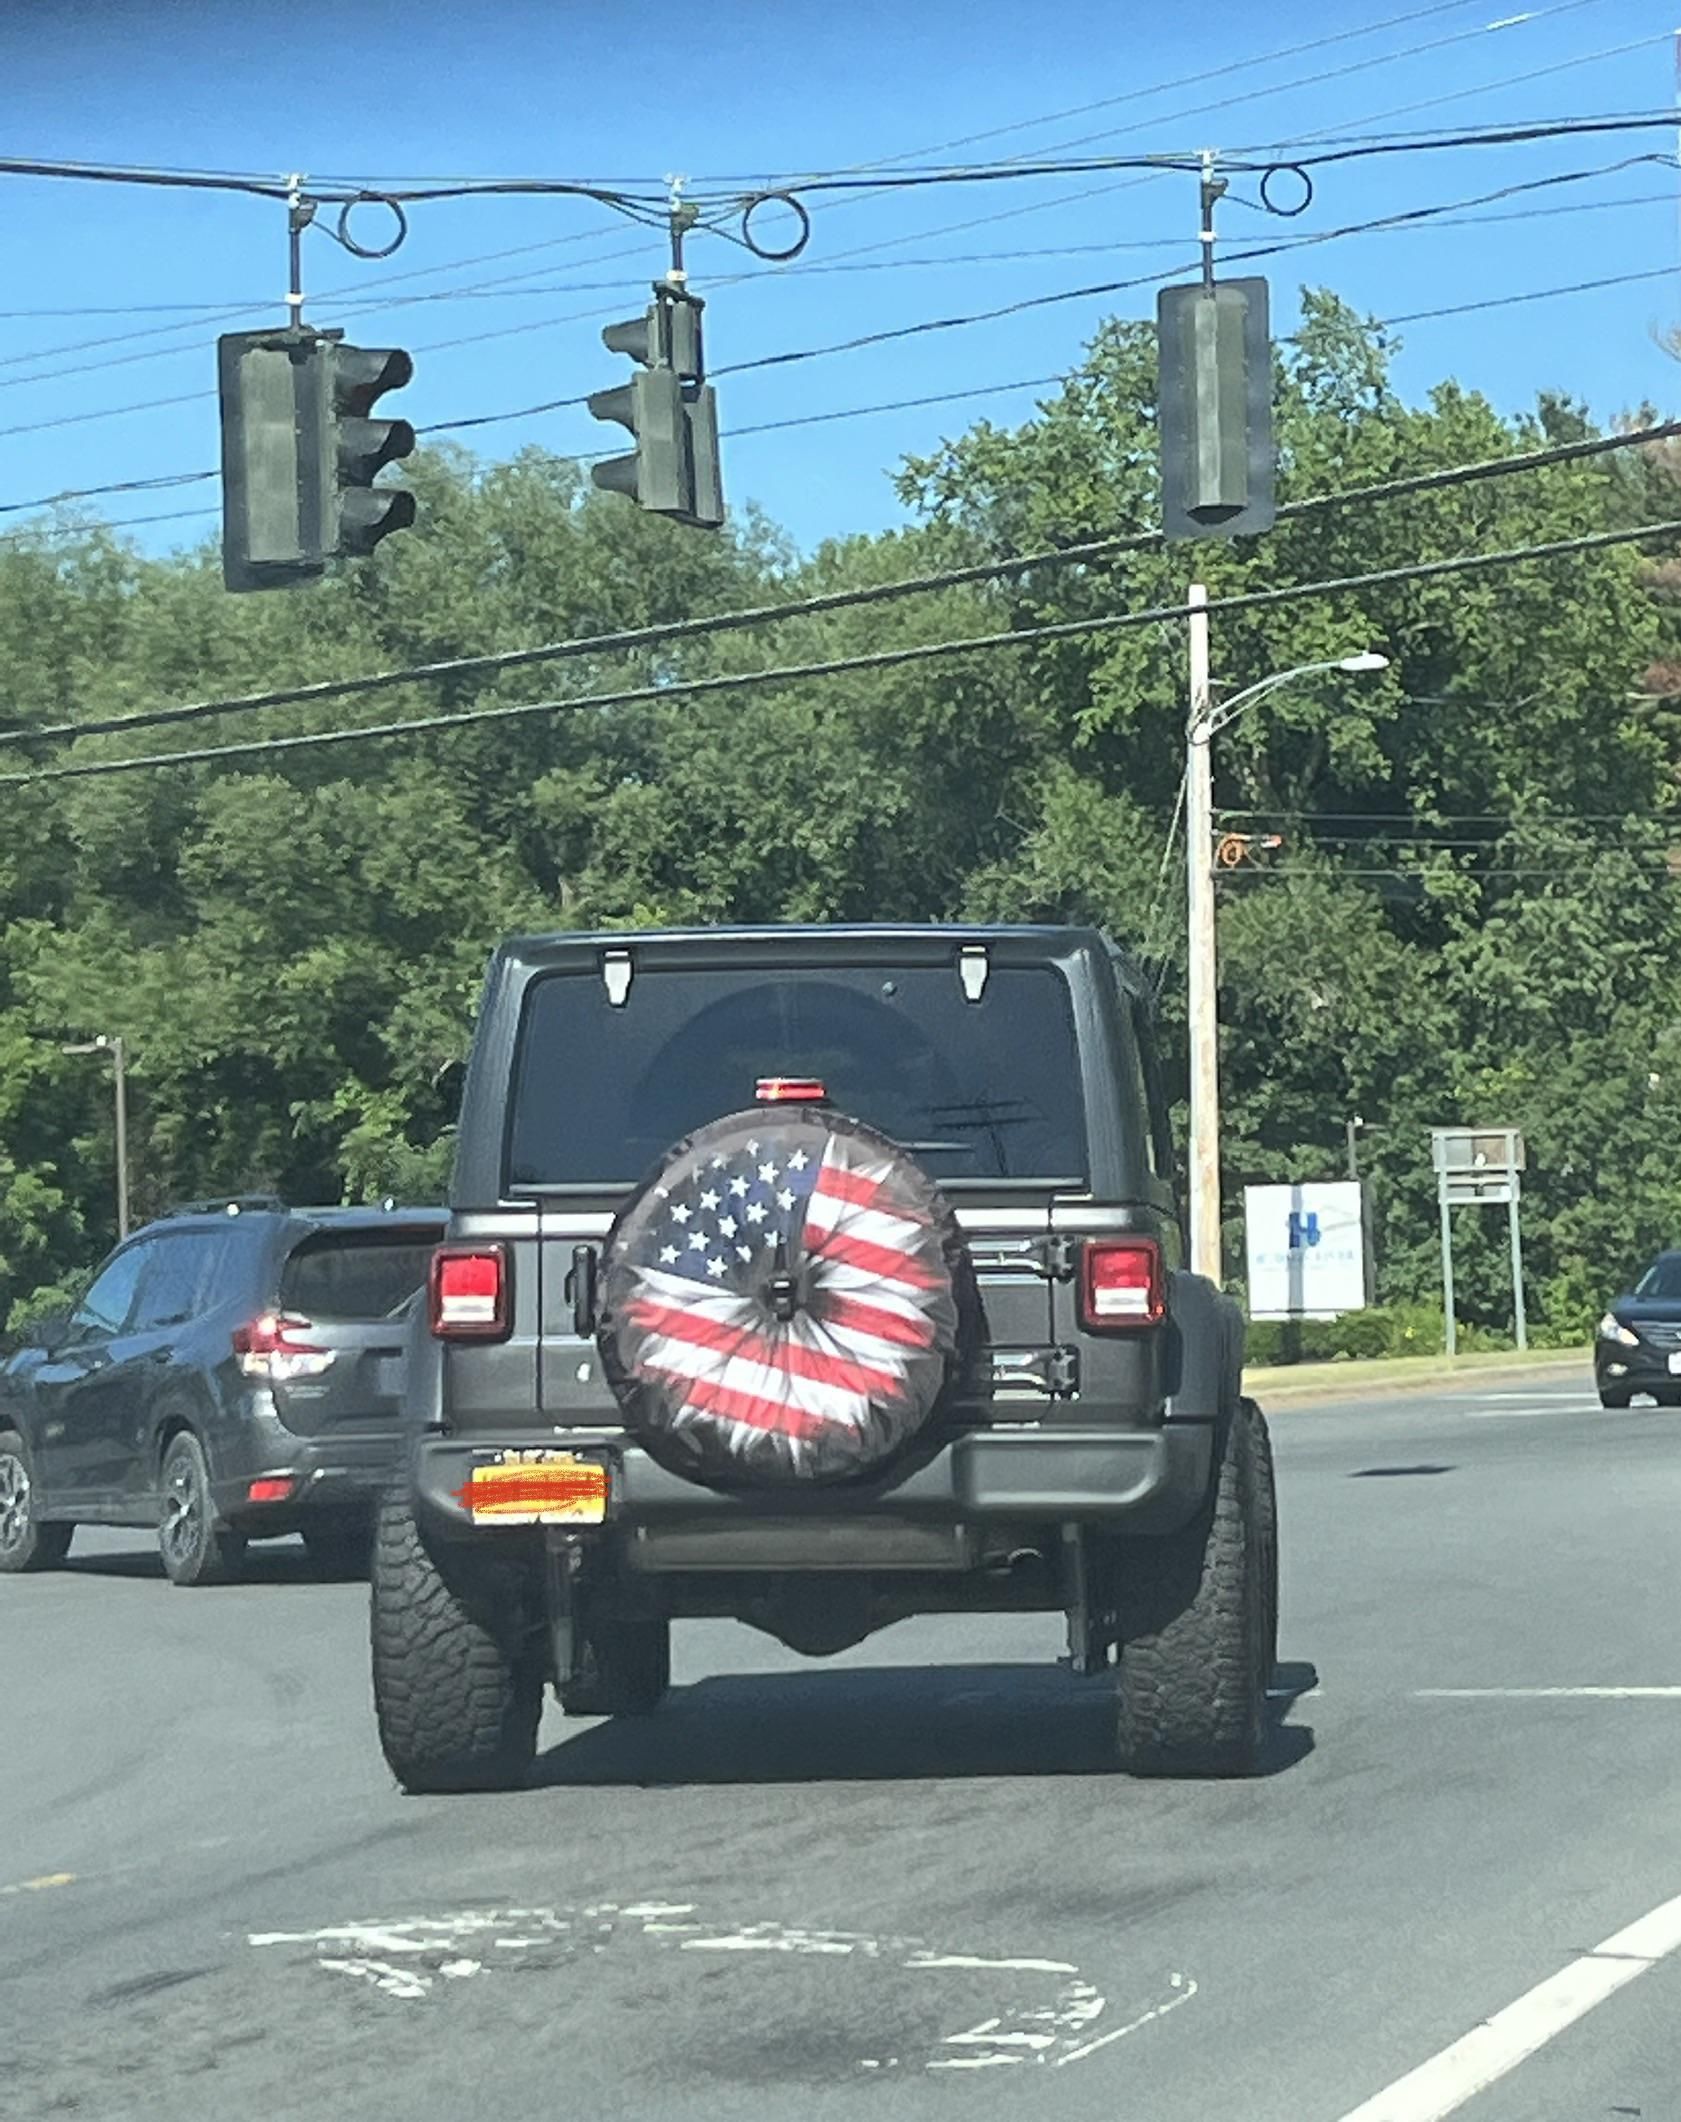 Today I spotted a patriotic butthole